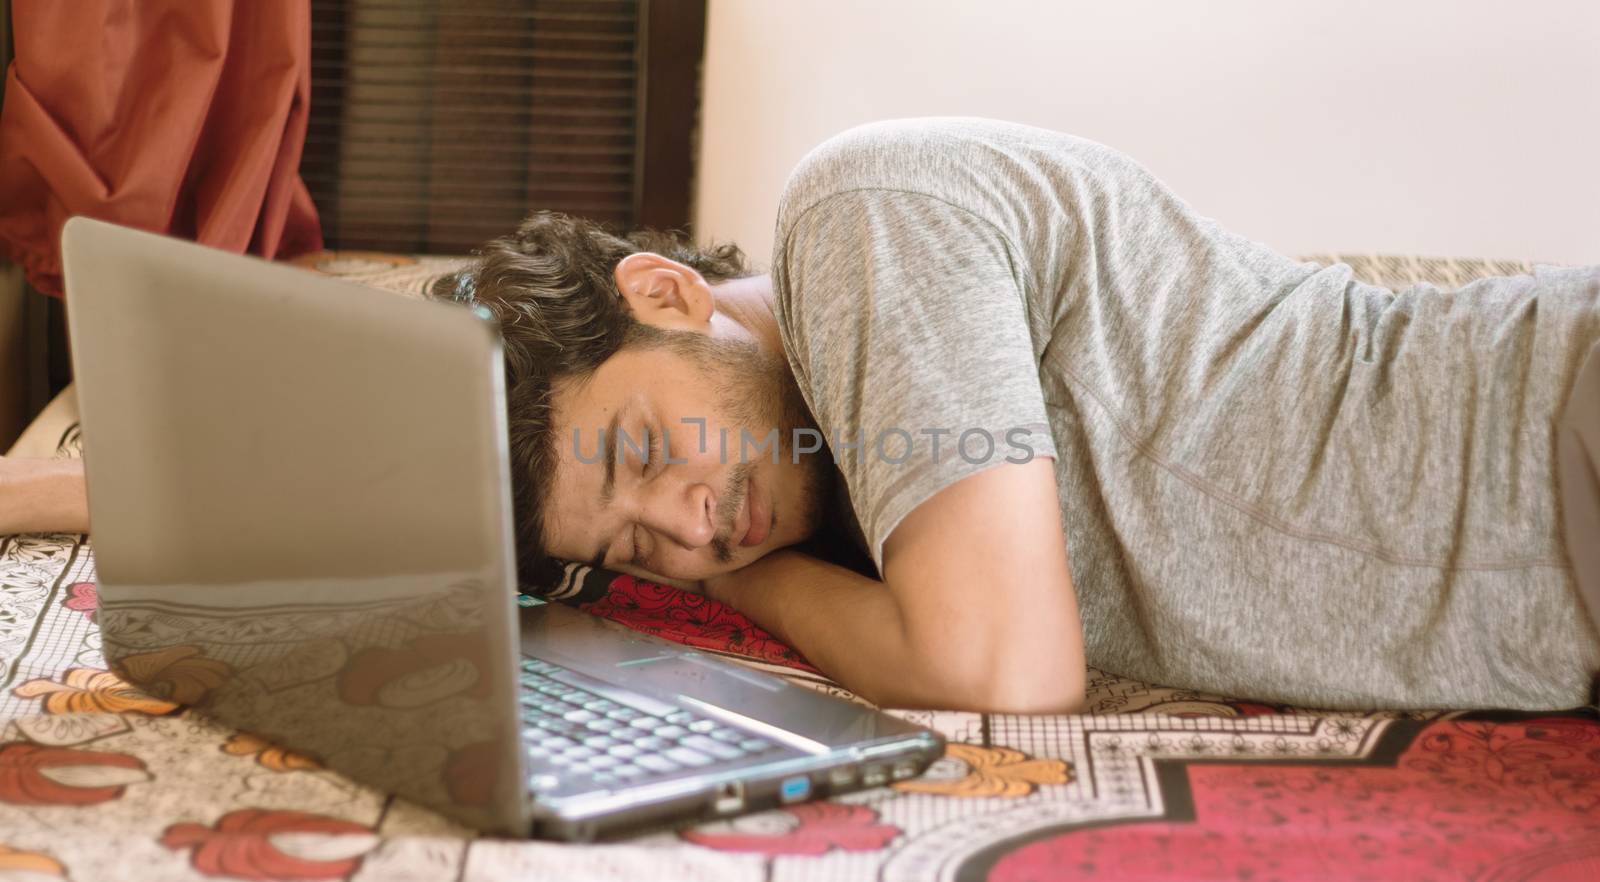 Tired young man sleeping in bed with laptop - hard work, laziness of working from home or WFH during coronavirus or covid-19 lock down concept. by lakshmiprasad.maski@gmai.com